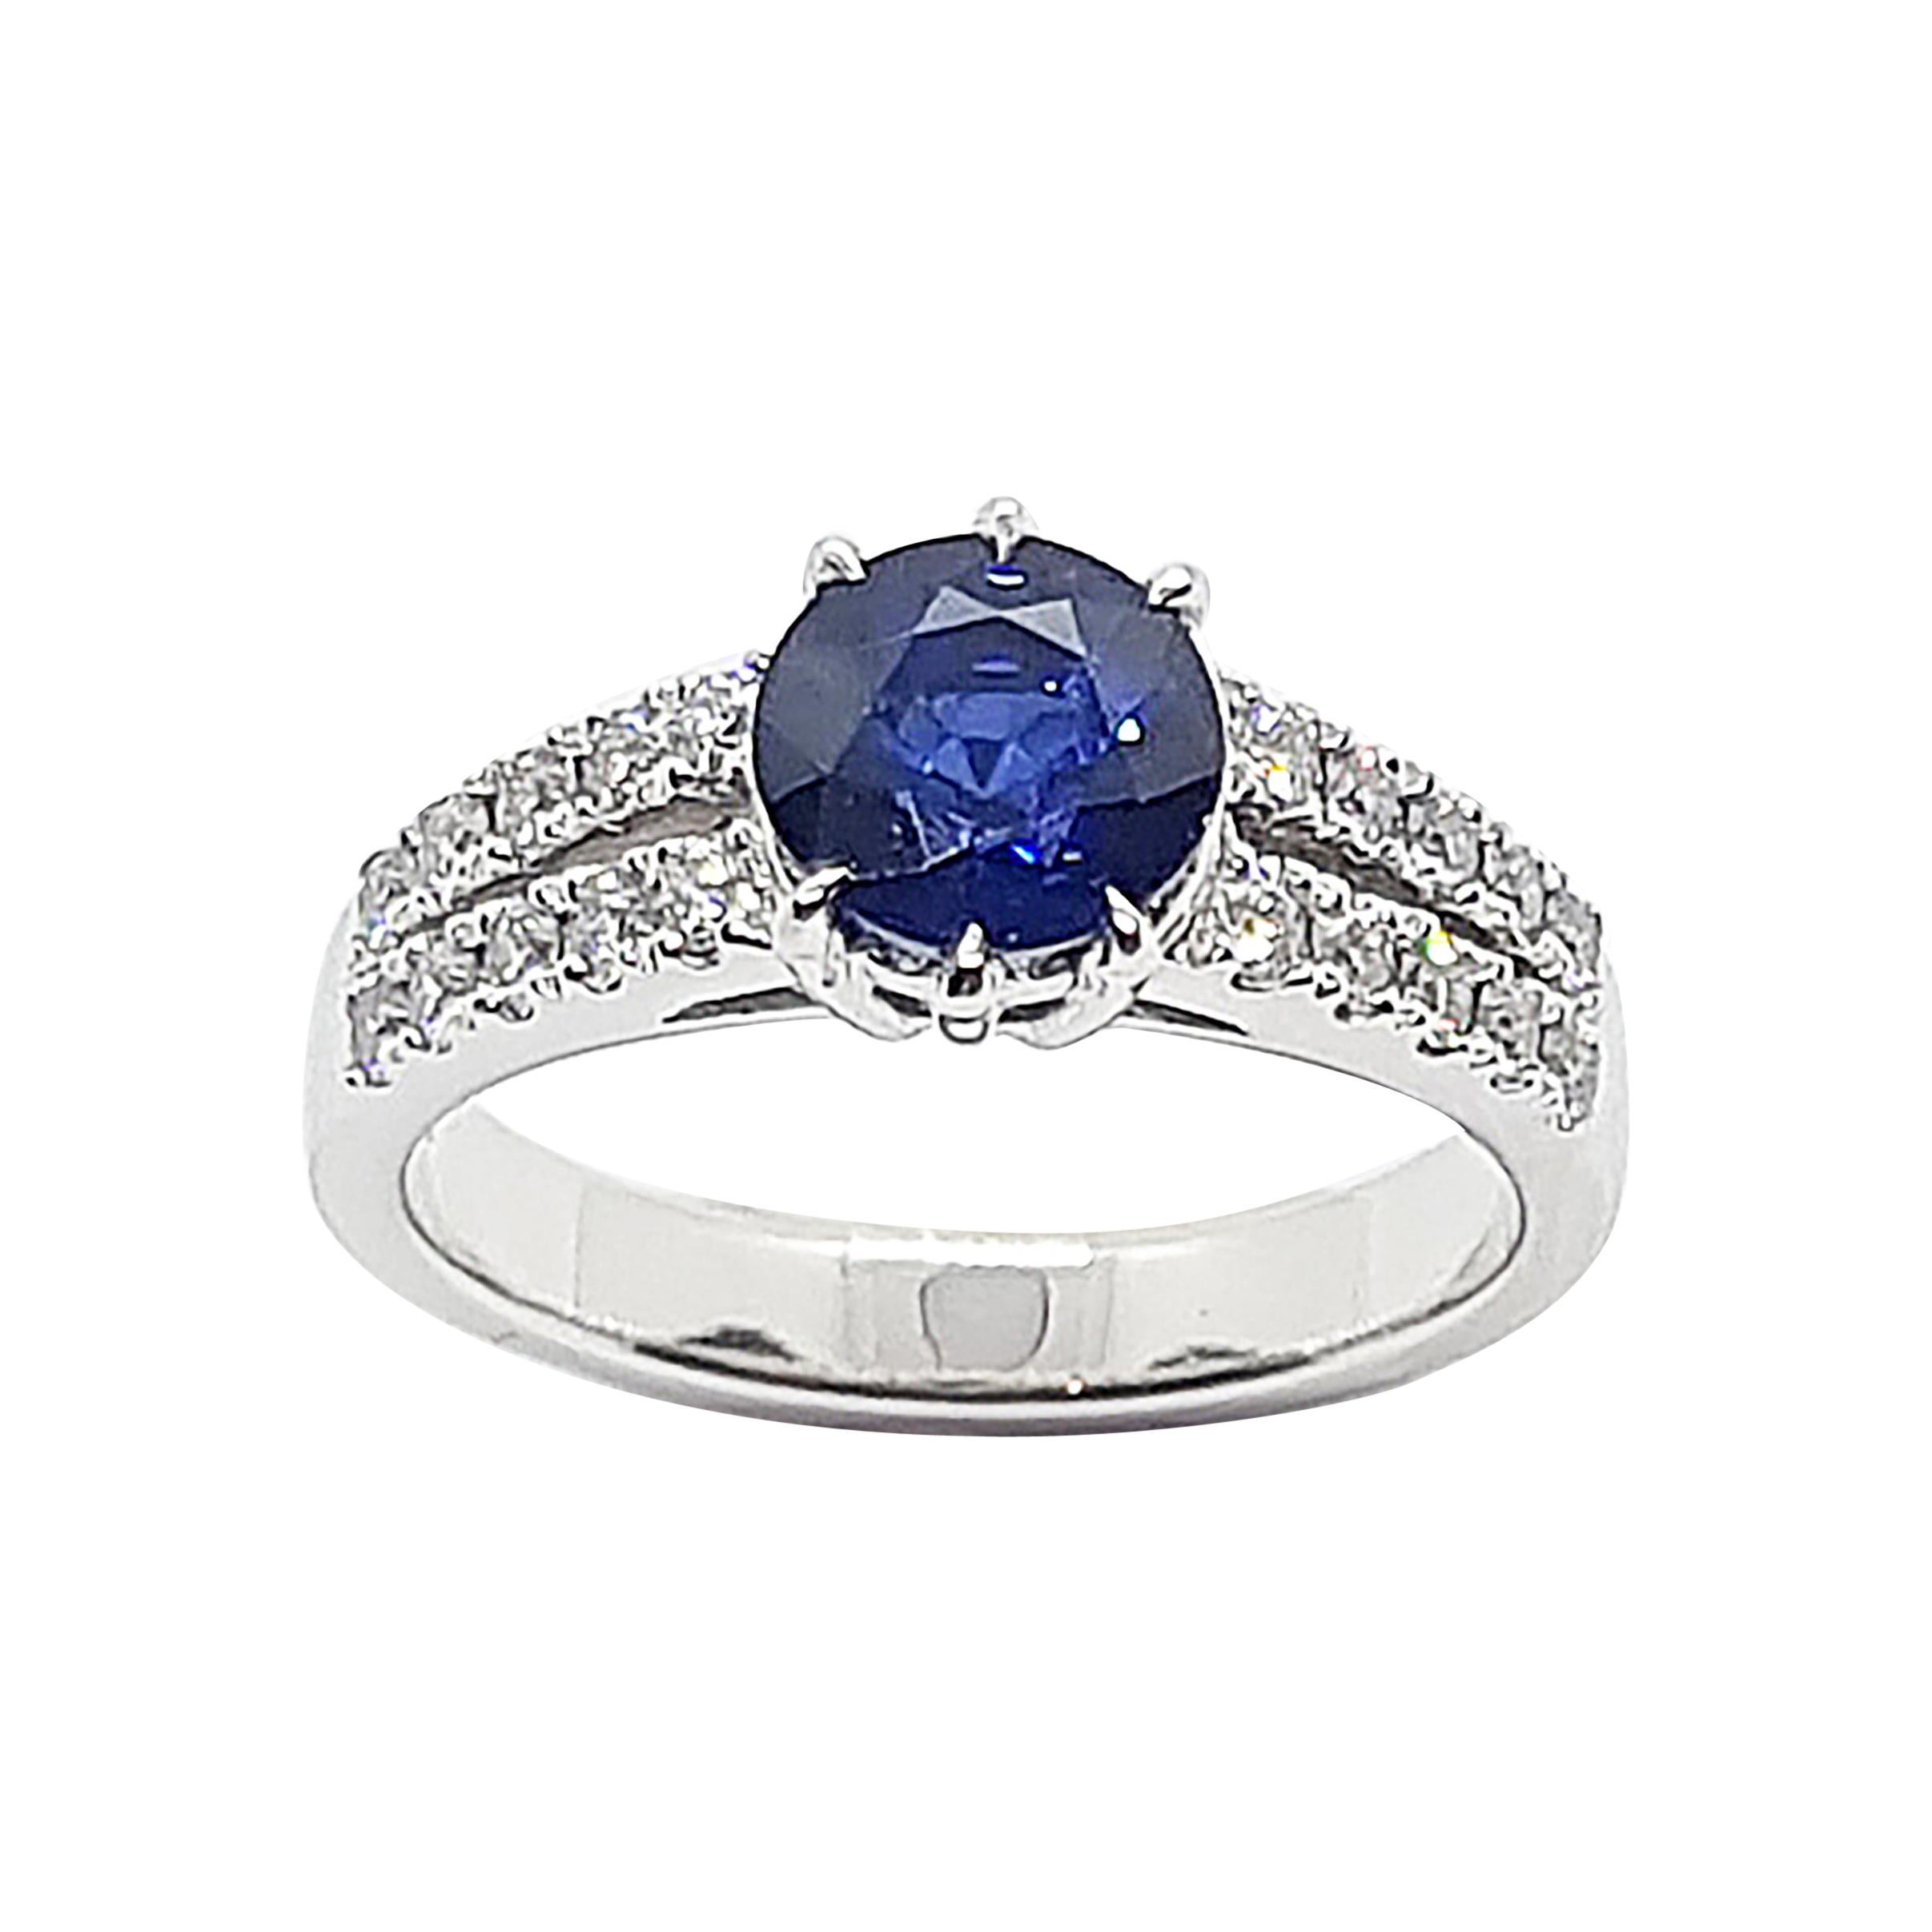 Round Blue Sapphire with Diamond Ring Set in Platinum 950 Settings